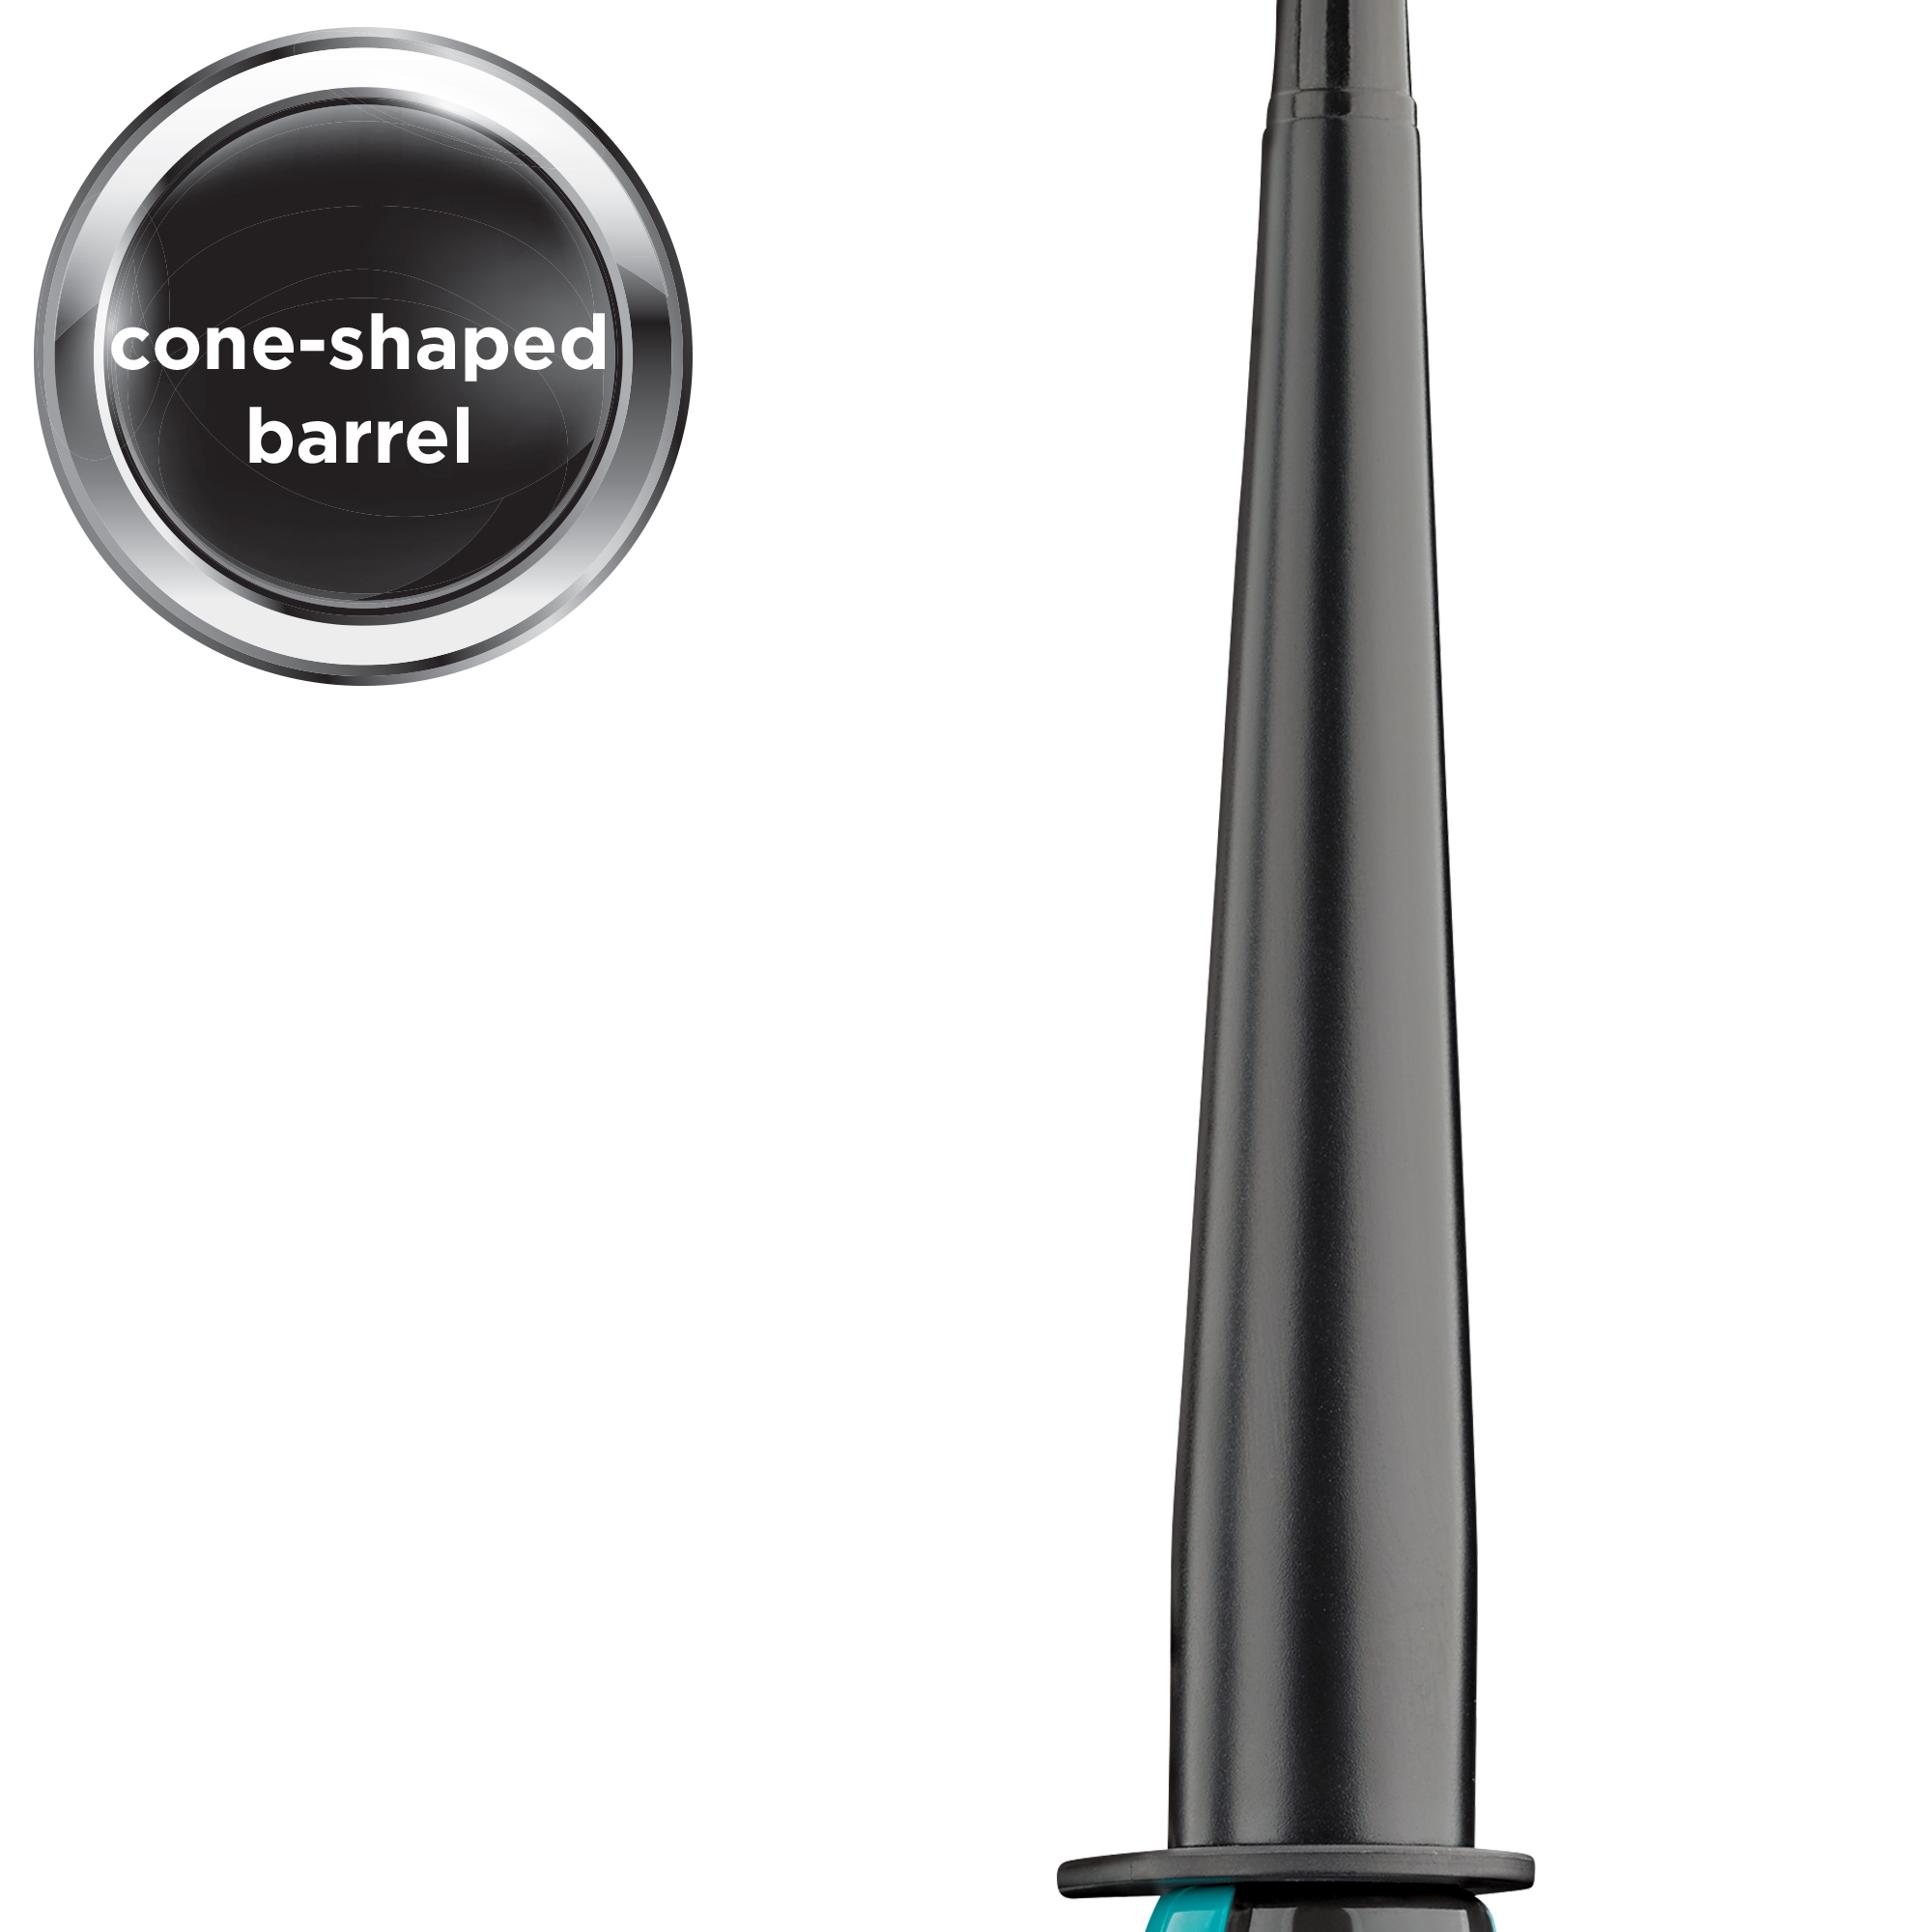 Revlon Perfect Heat Ceramic Tapered Curling Wand, Teal with Protective Glove - image 2 of 6